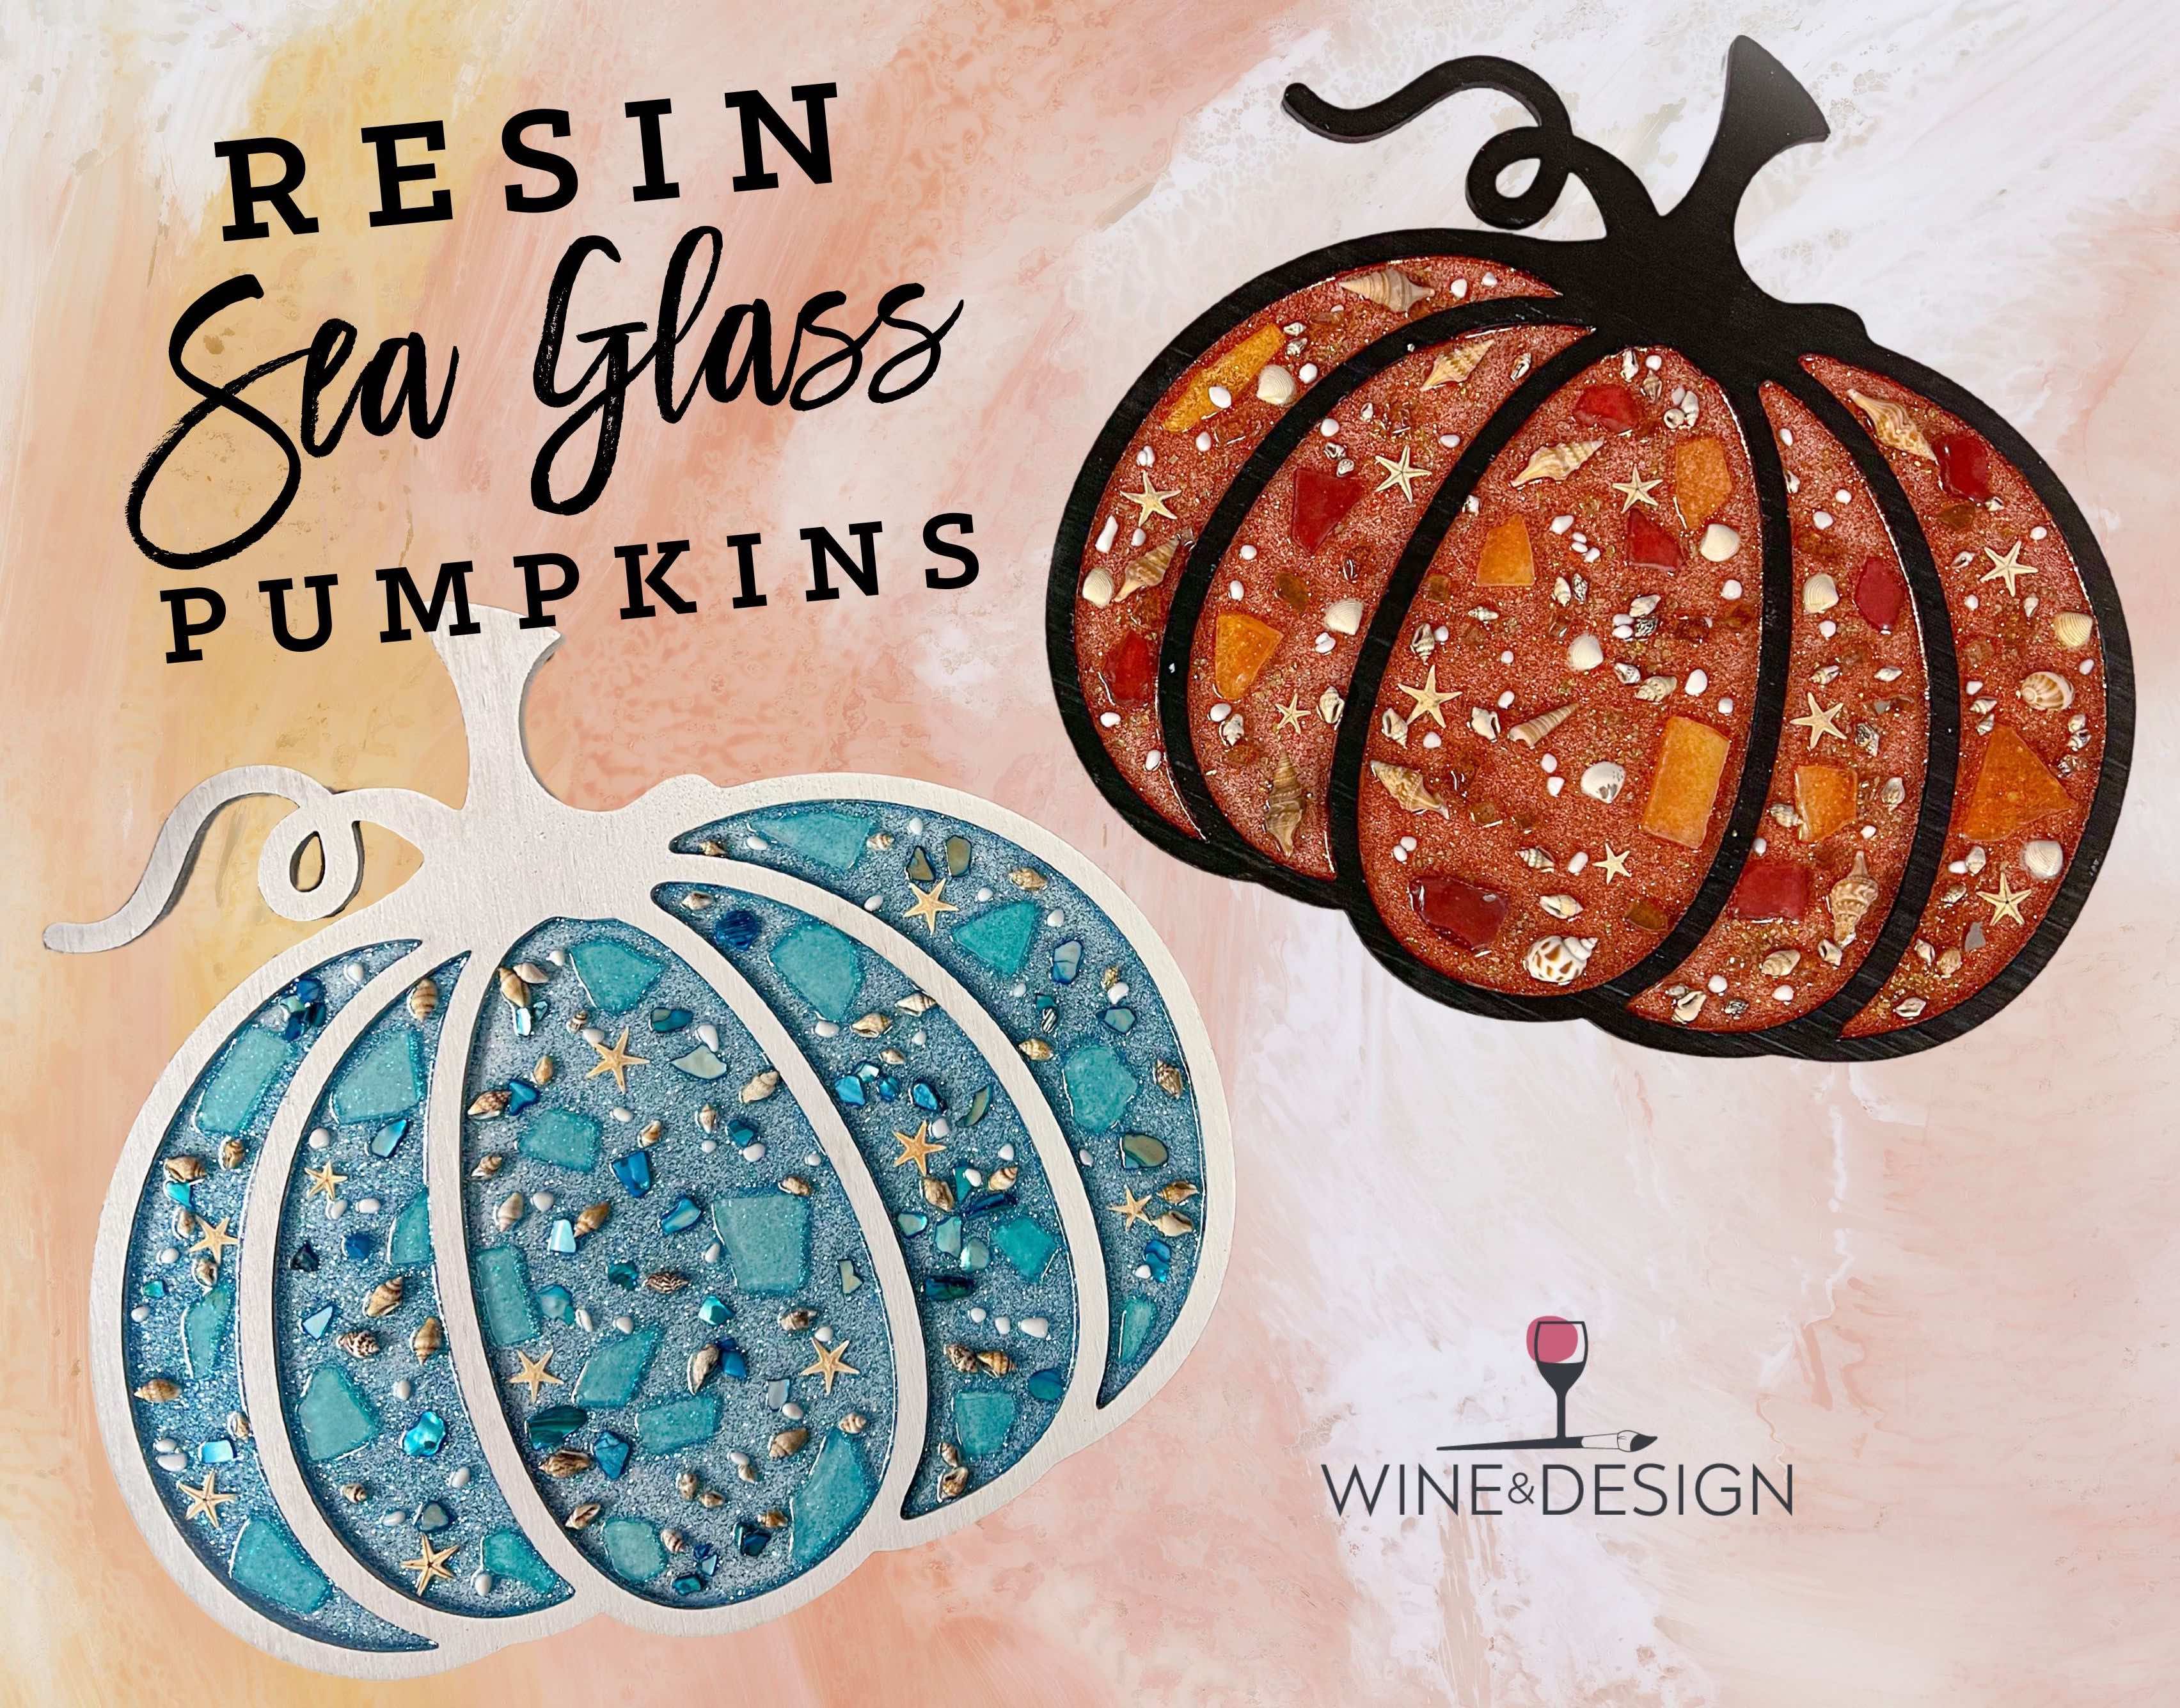 SOLD OUT!! RESIN SEA GLASS PUMPKINS